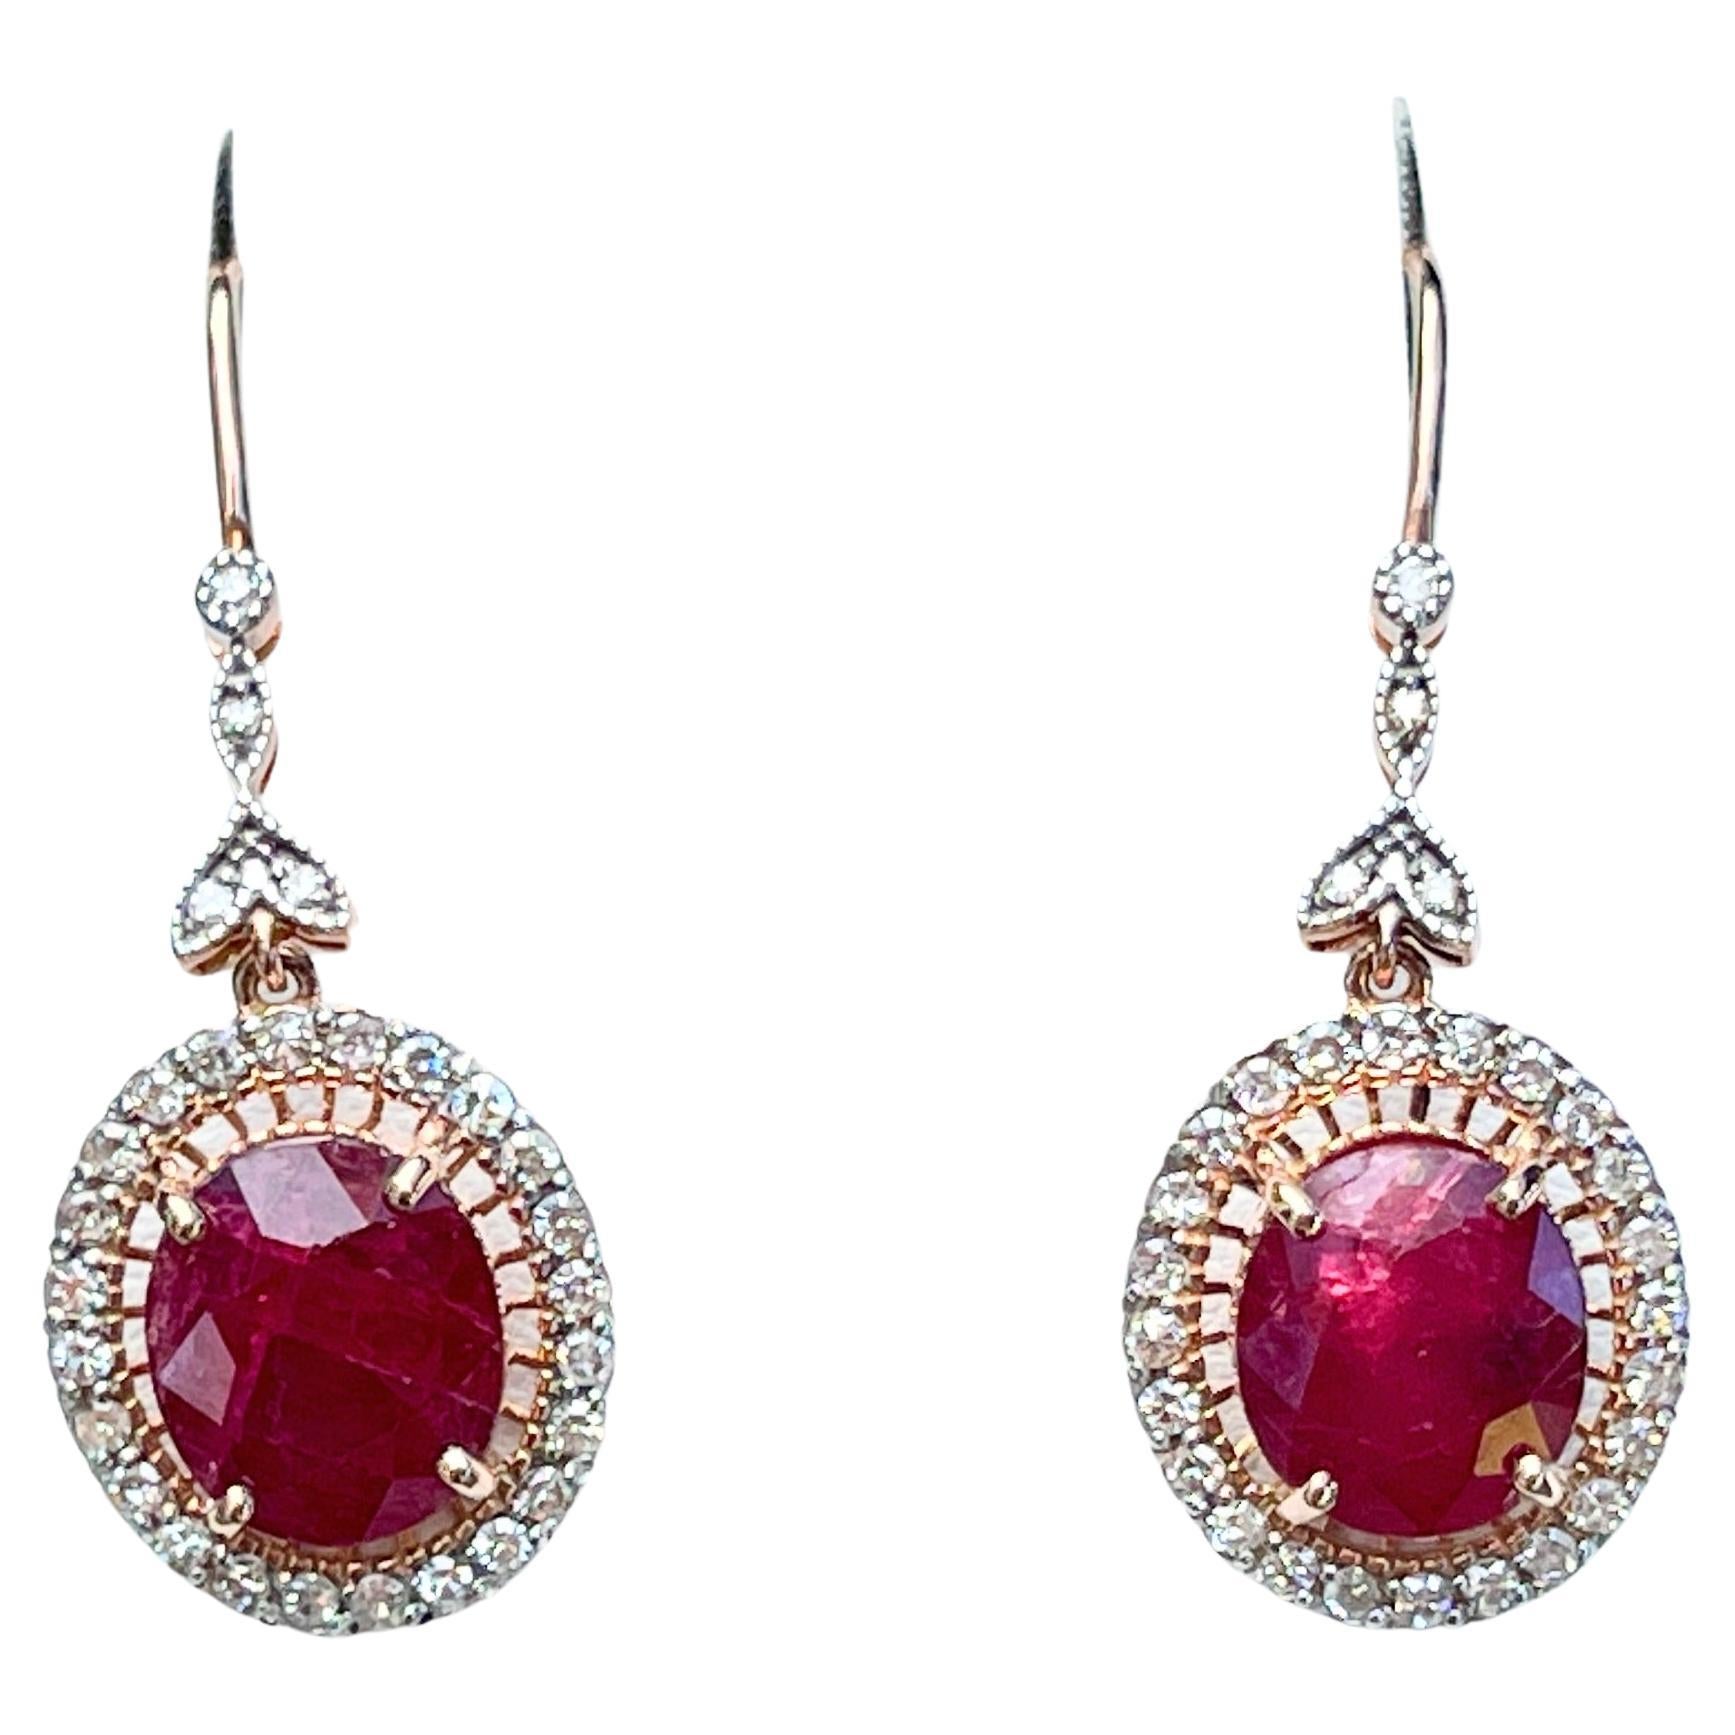 Belle Epoque Style Ruby Diamond Dangle Hook Earrings 14ct Rose Gold Valuation